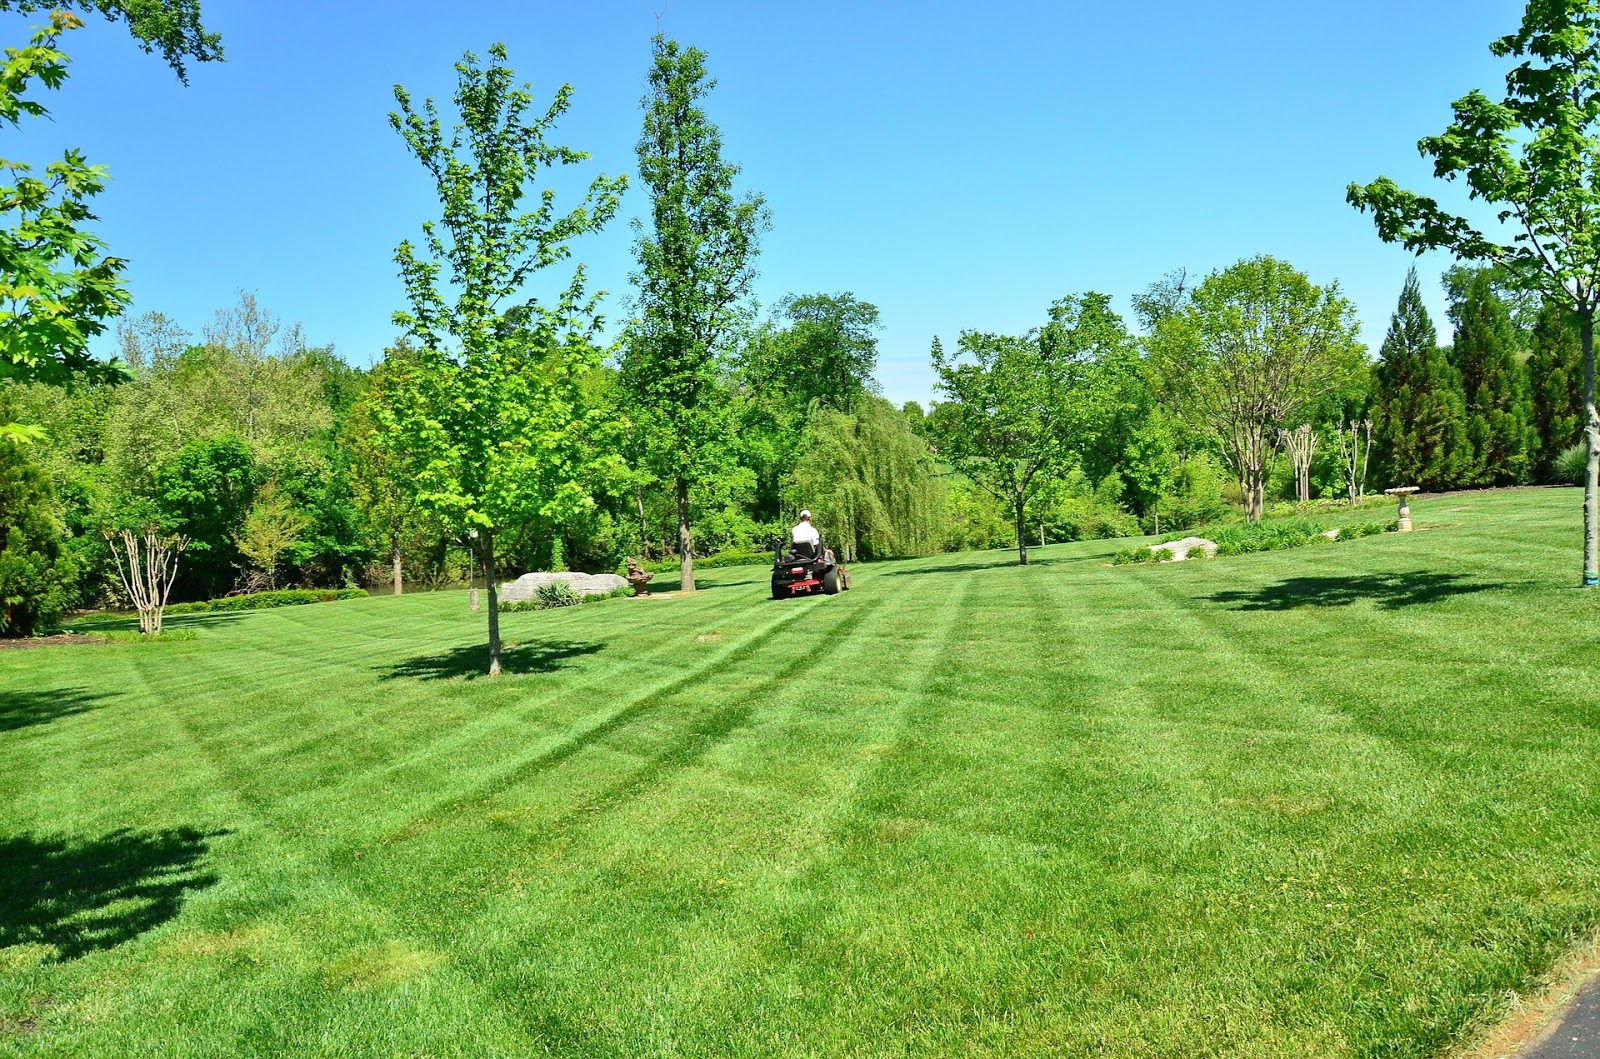 A Step By Step Guide To Proper Lawn Care